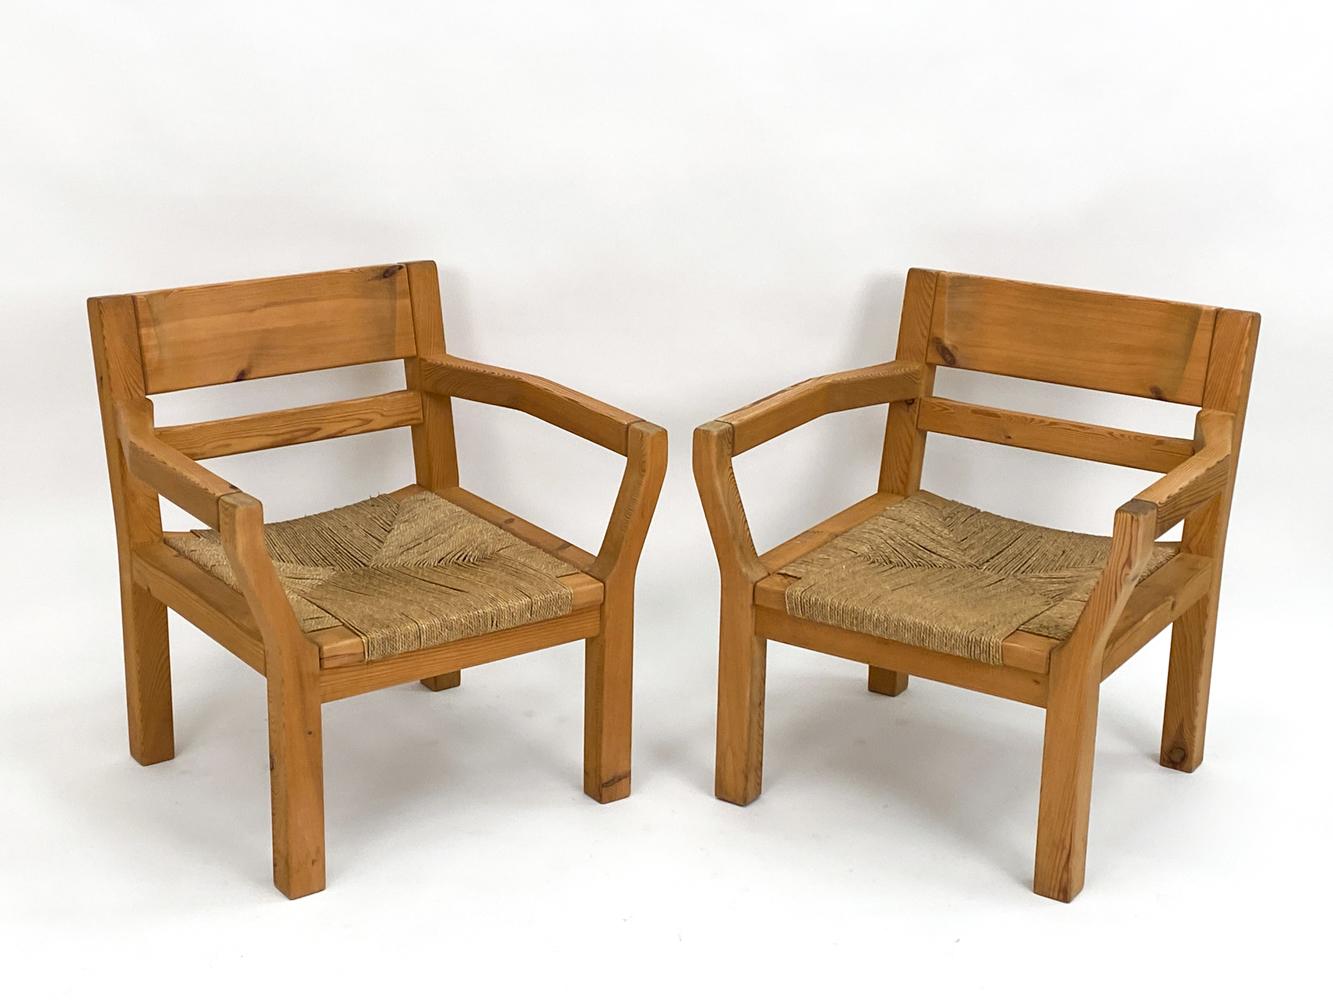 Immerse yourself in the serene beauty of Scandinavian design with this pair of lounge chairs, expertly crafted by the renowned designer Tage Poulsen in the 1970s. A harmonious marriage of raw nature and human craftsmanship, these chairs offer a